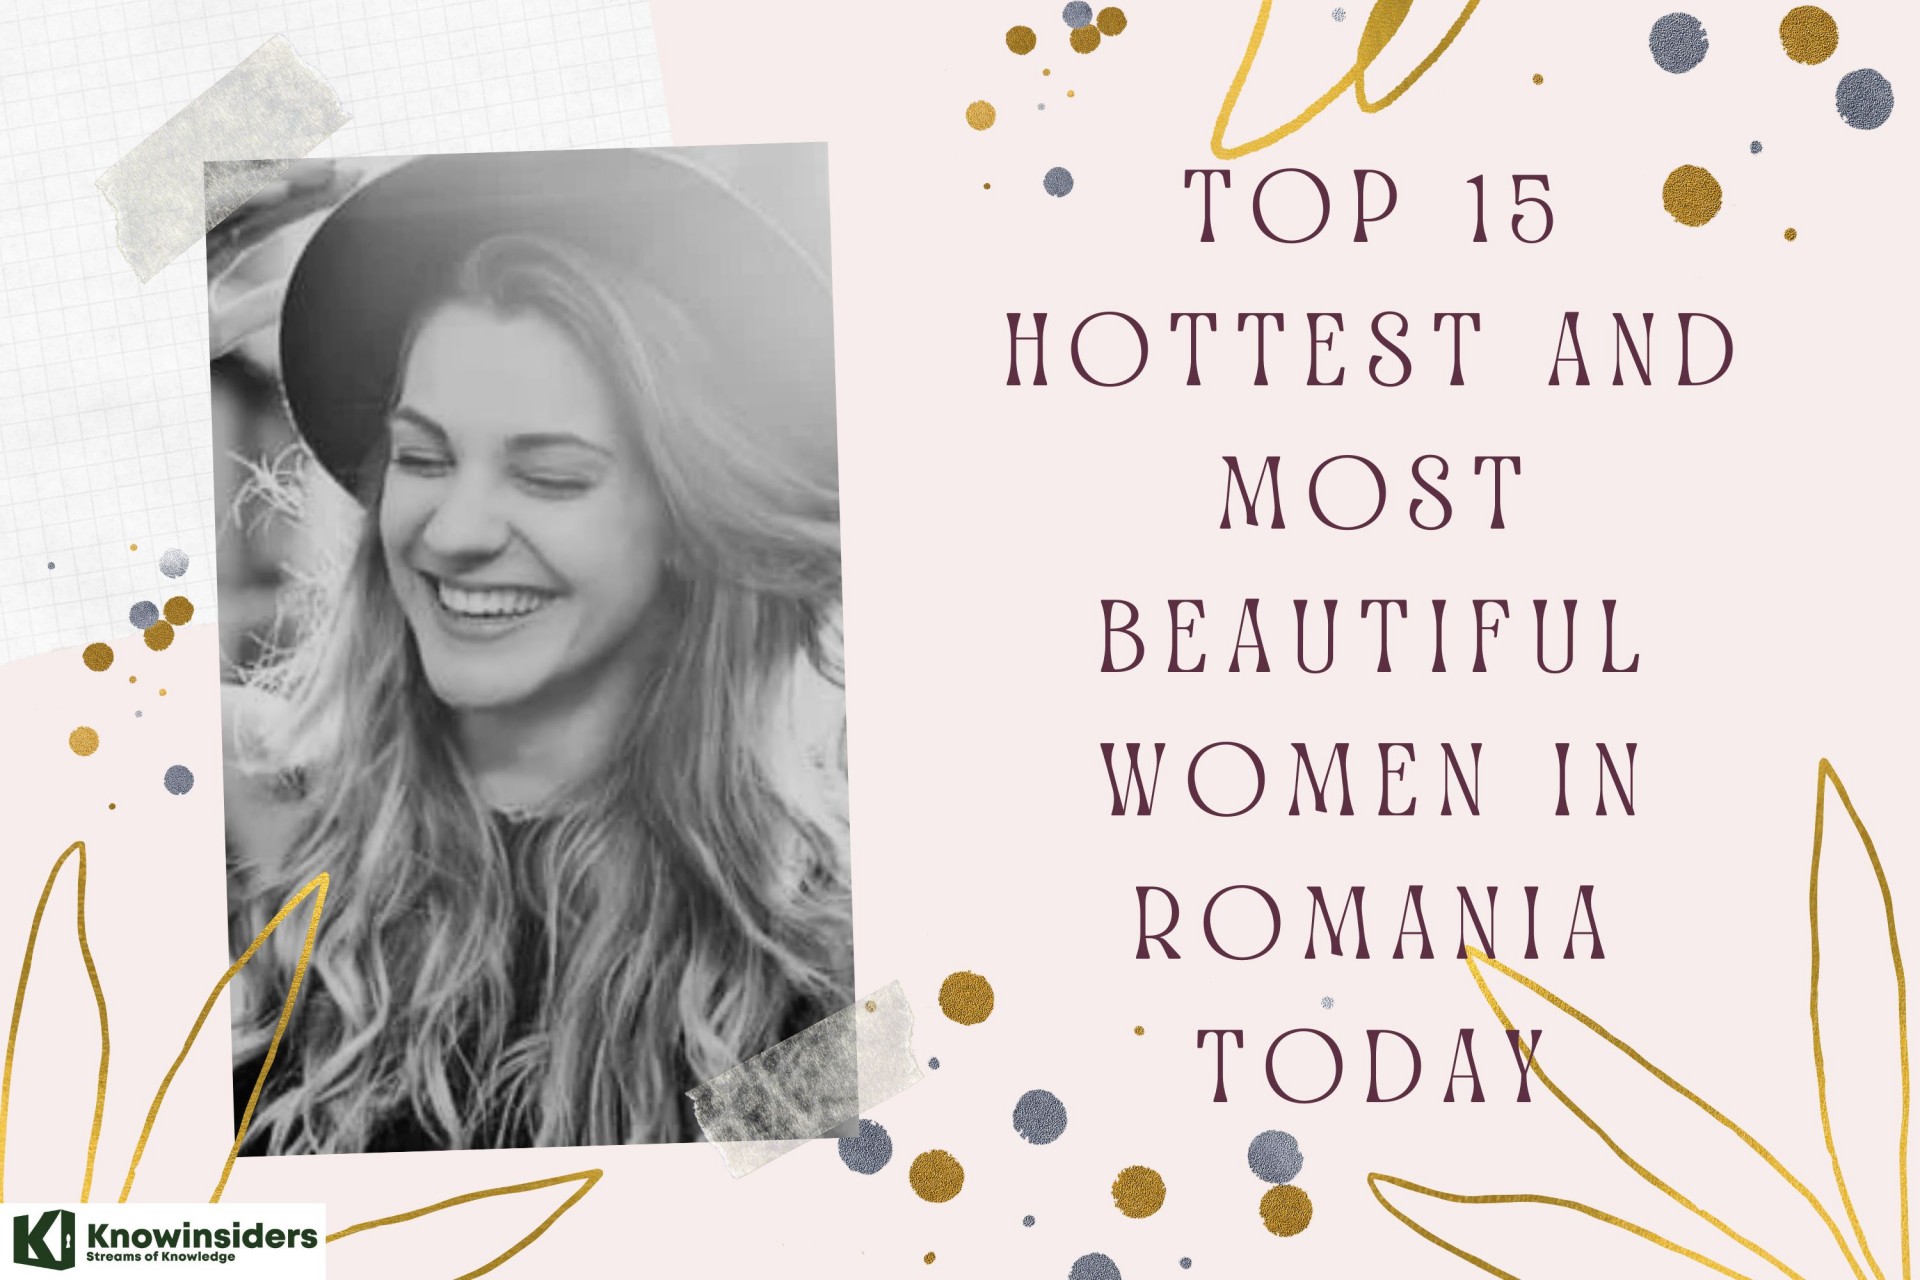 Top 15 Hottest and Most Beautiful Women in Romania Today